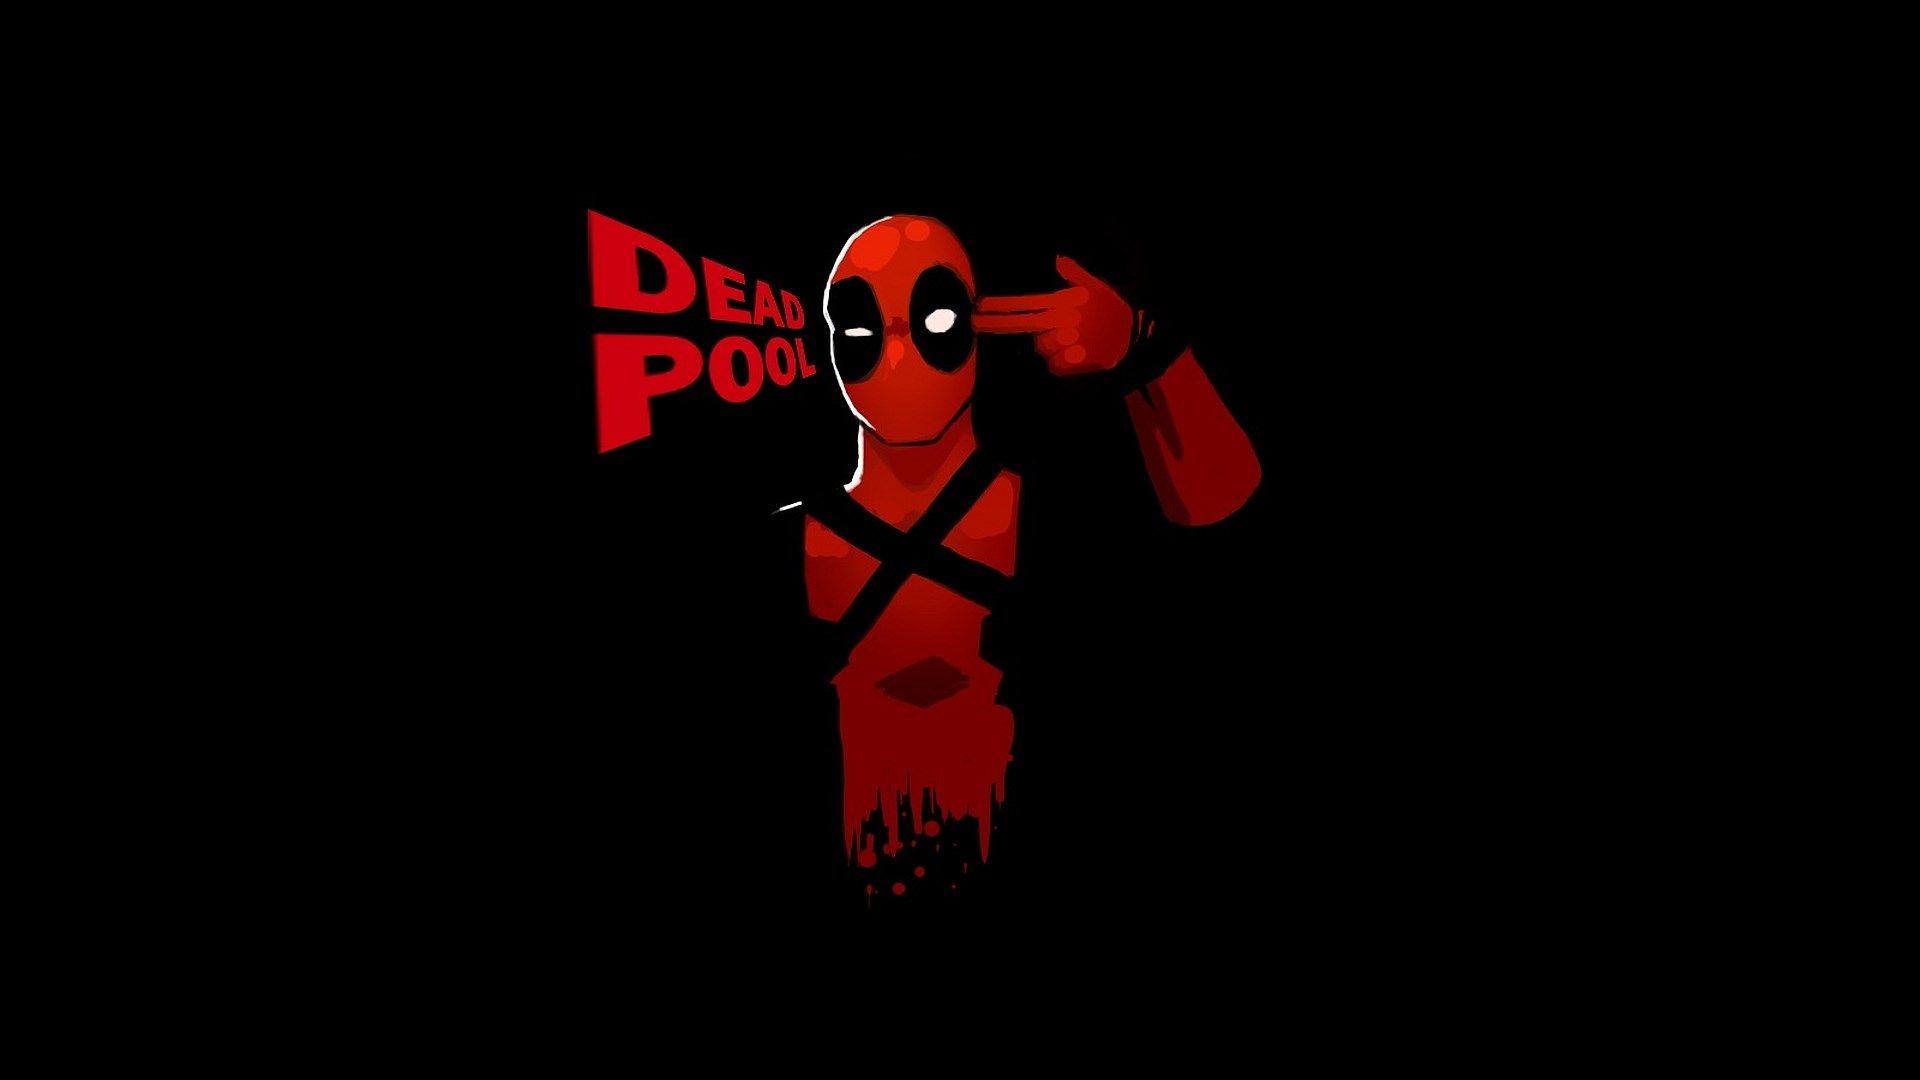 Free Awesome deadpool pic category. wallpapercreator